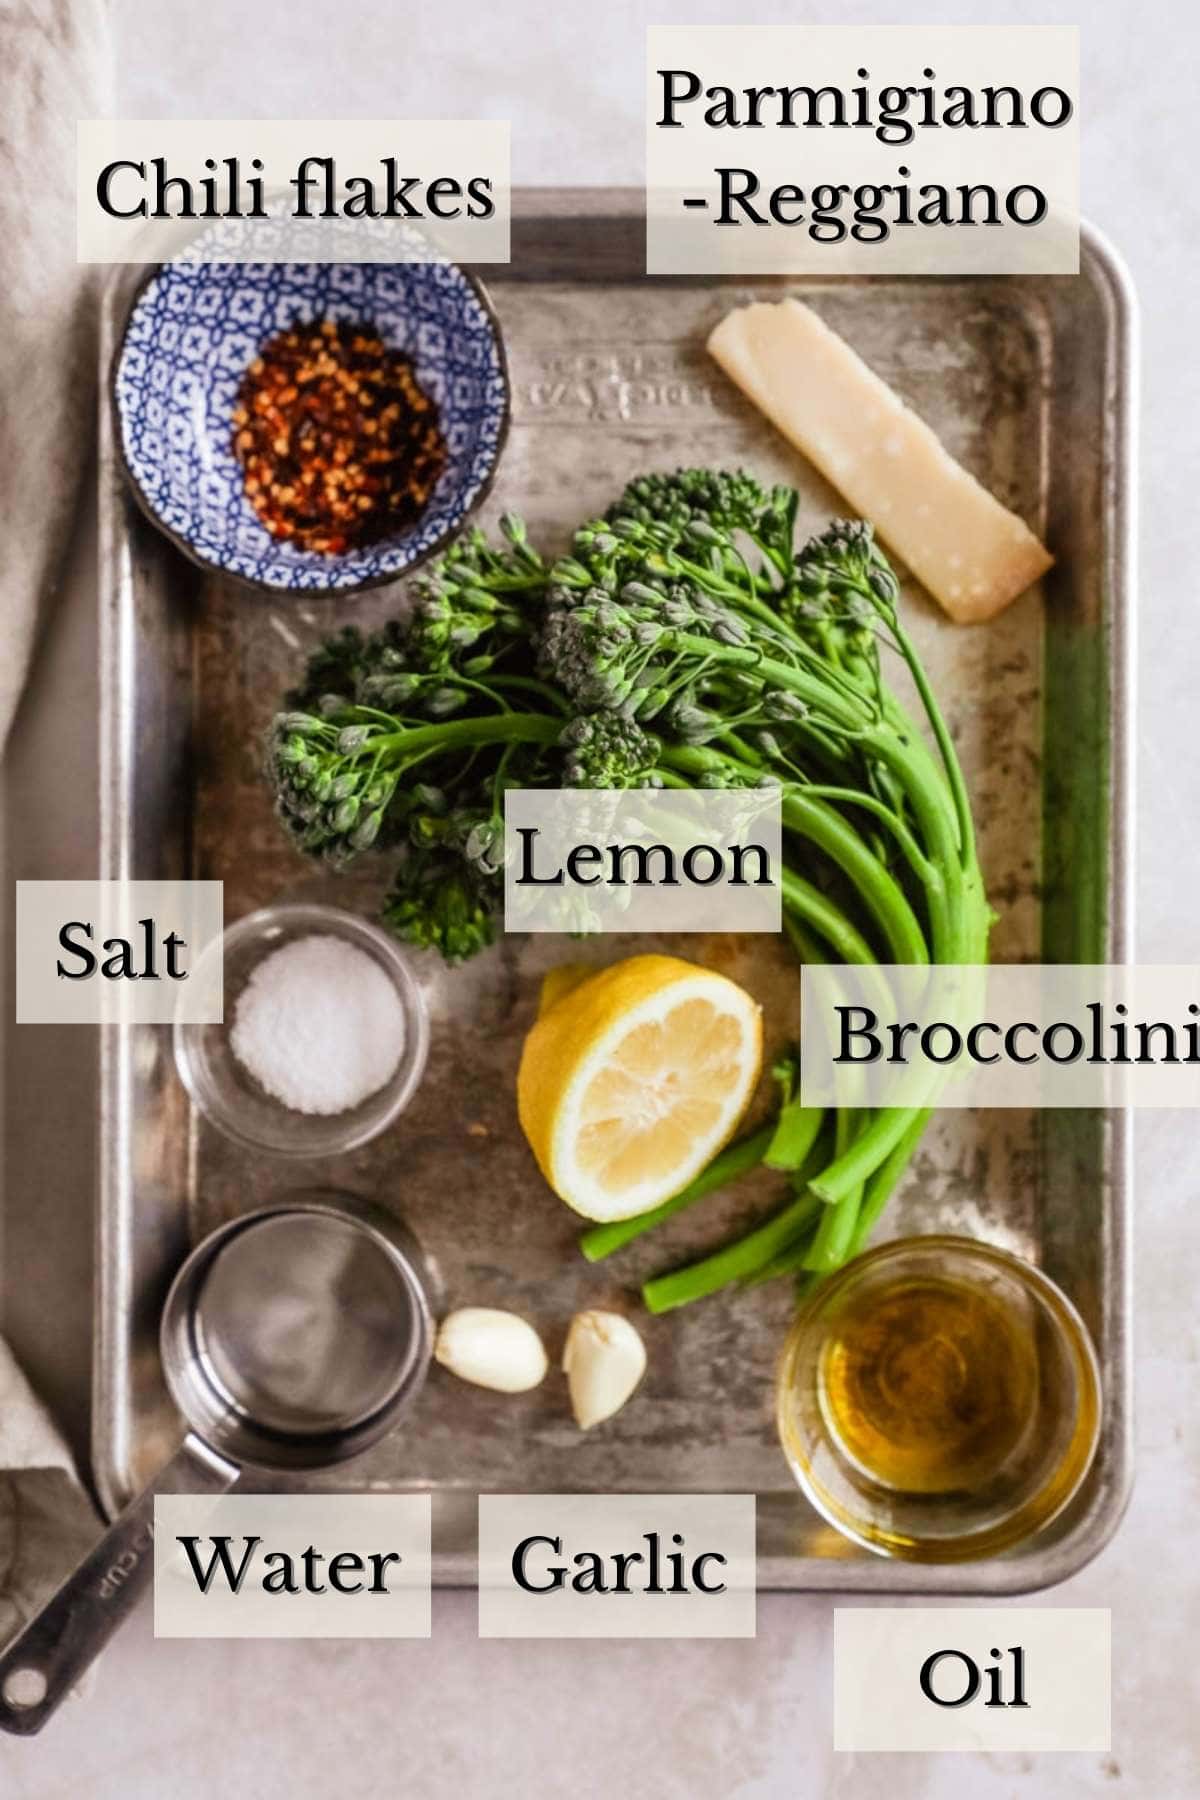 Ingredients to make broccolini, including salt, pepper, garlic, oil, chili flakes, and lemon.